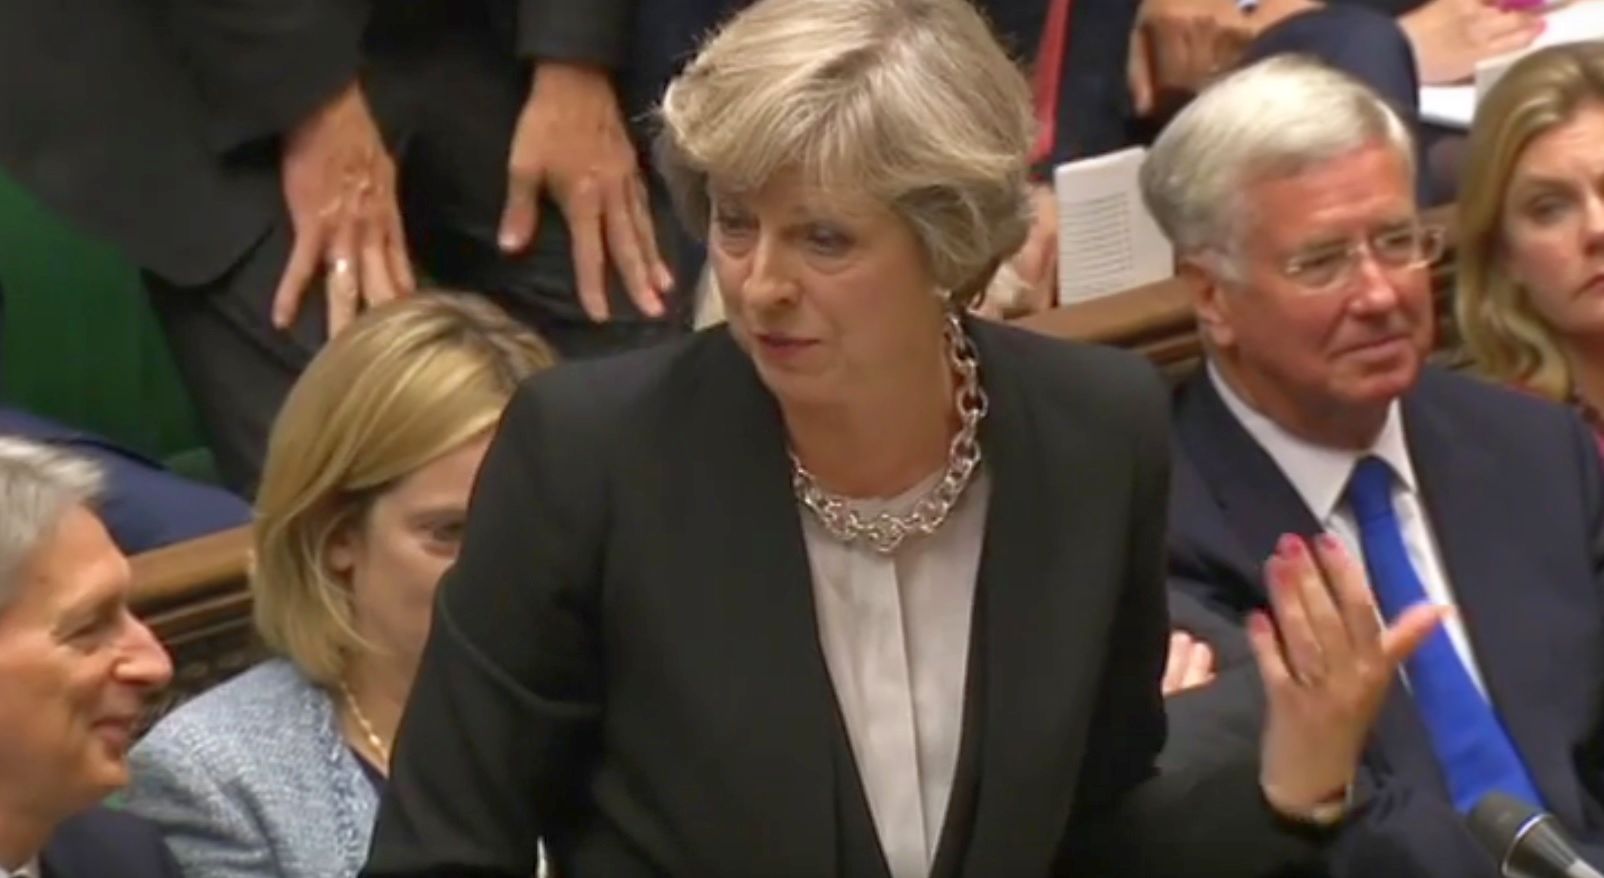 Prime Minister Theresa May has expressed support for the British farming industry today as PMQs